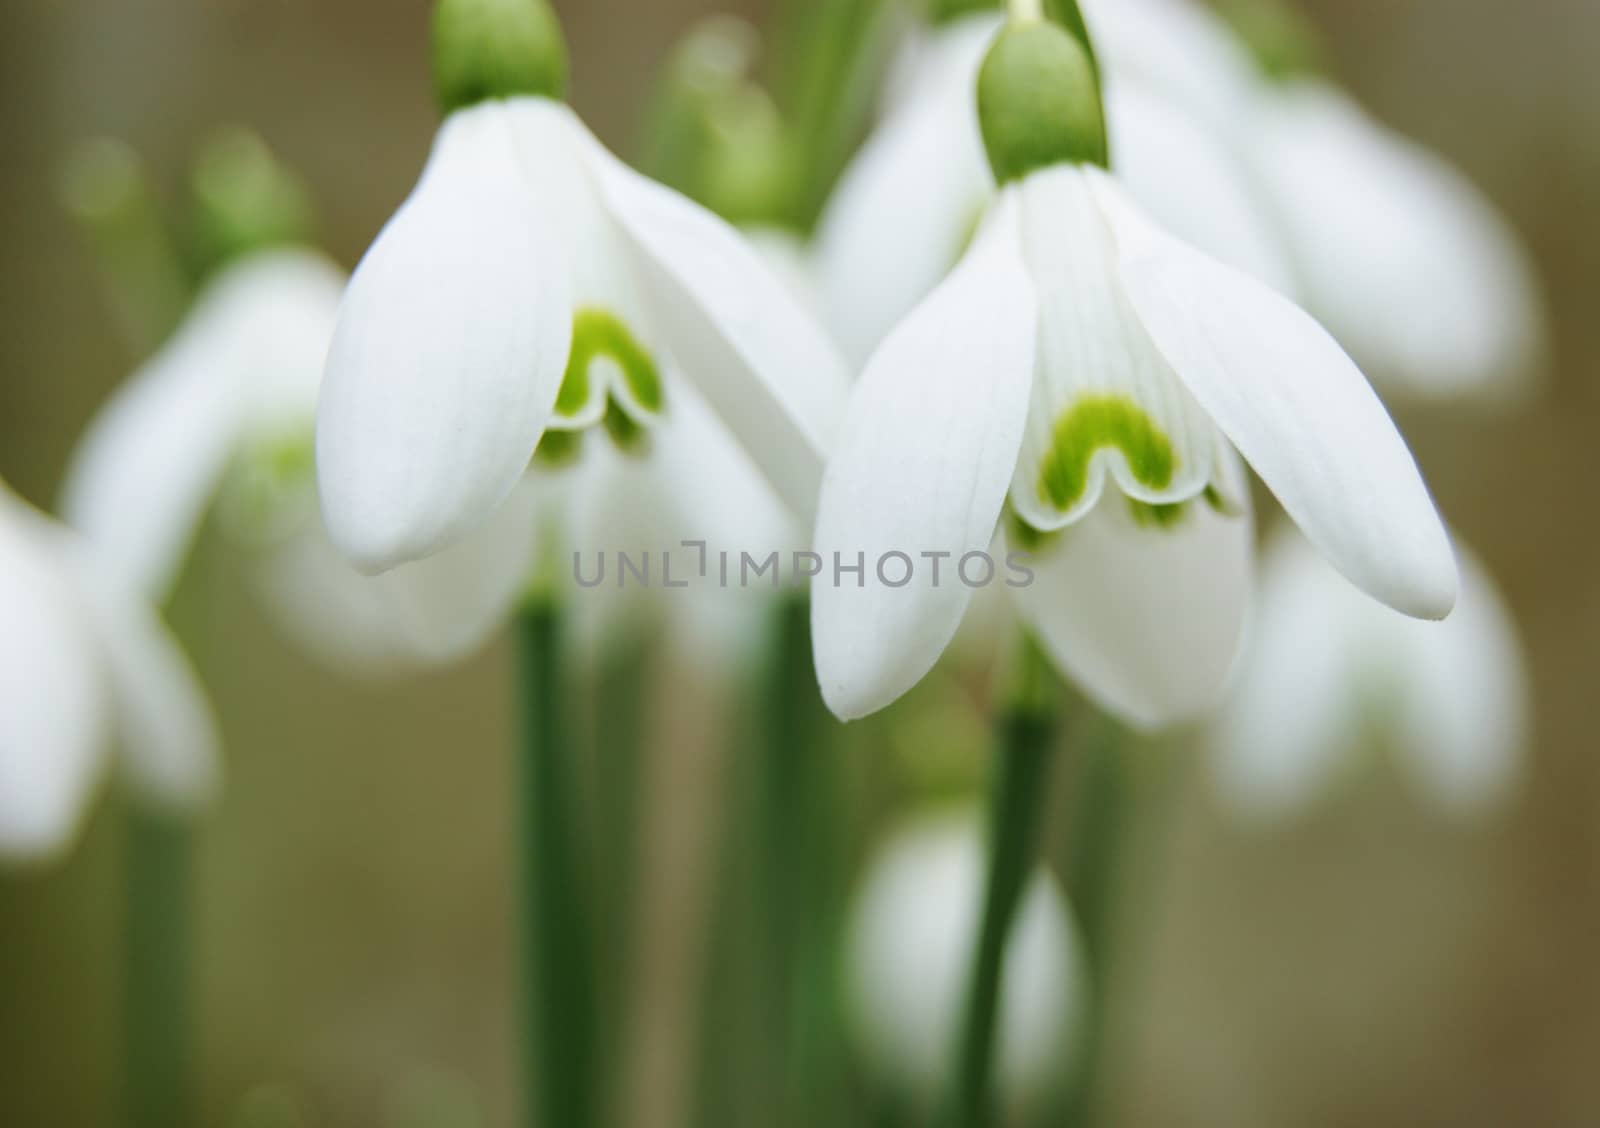 A close-up image of white Snowdrop flowers.